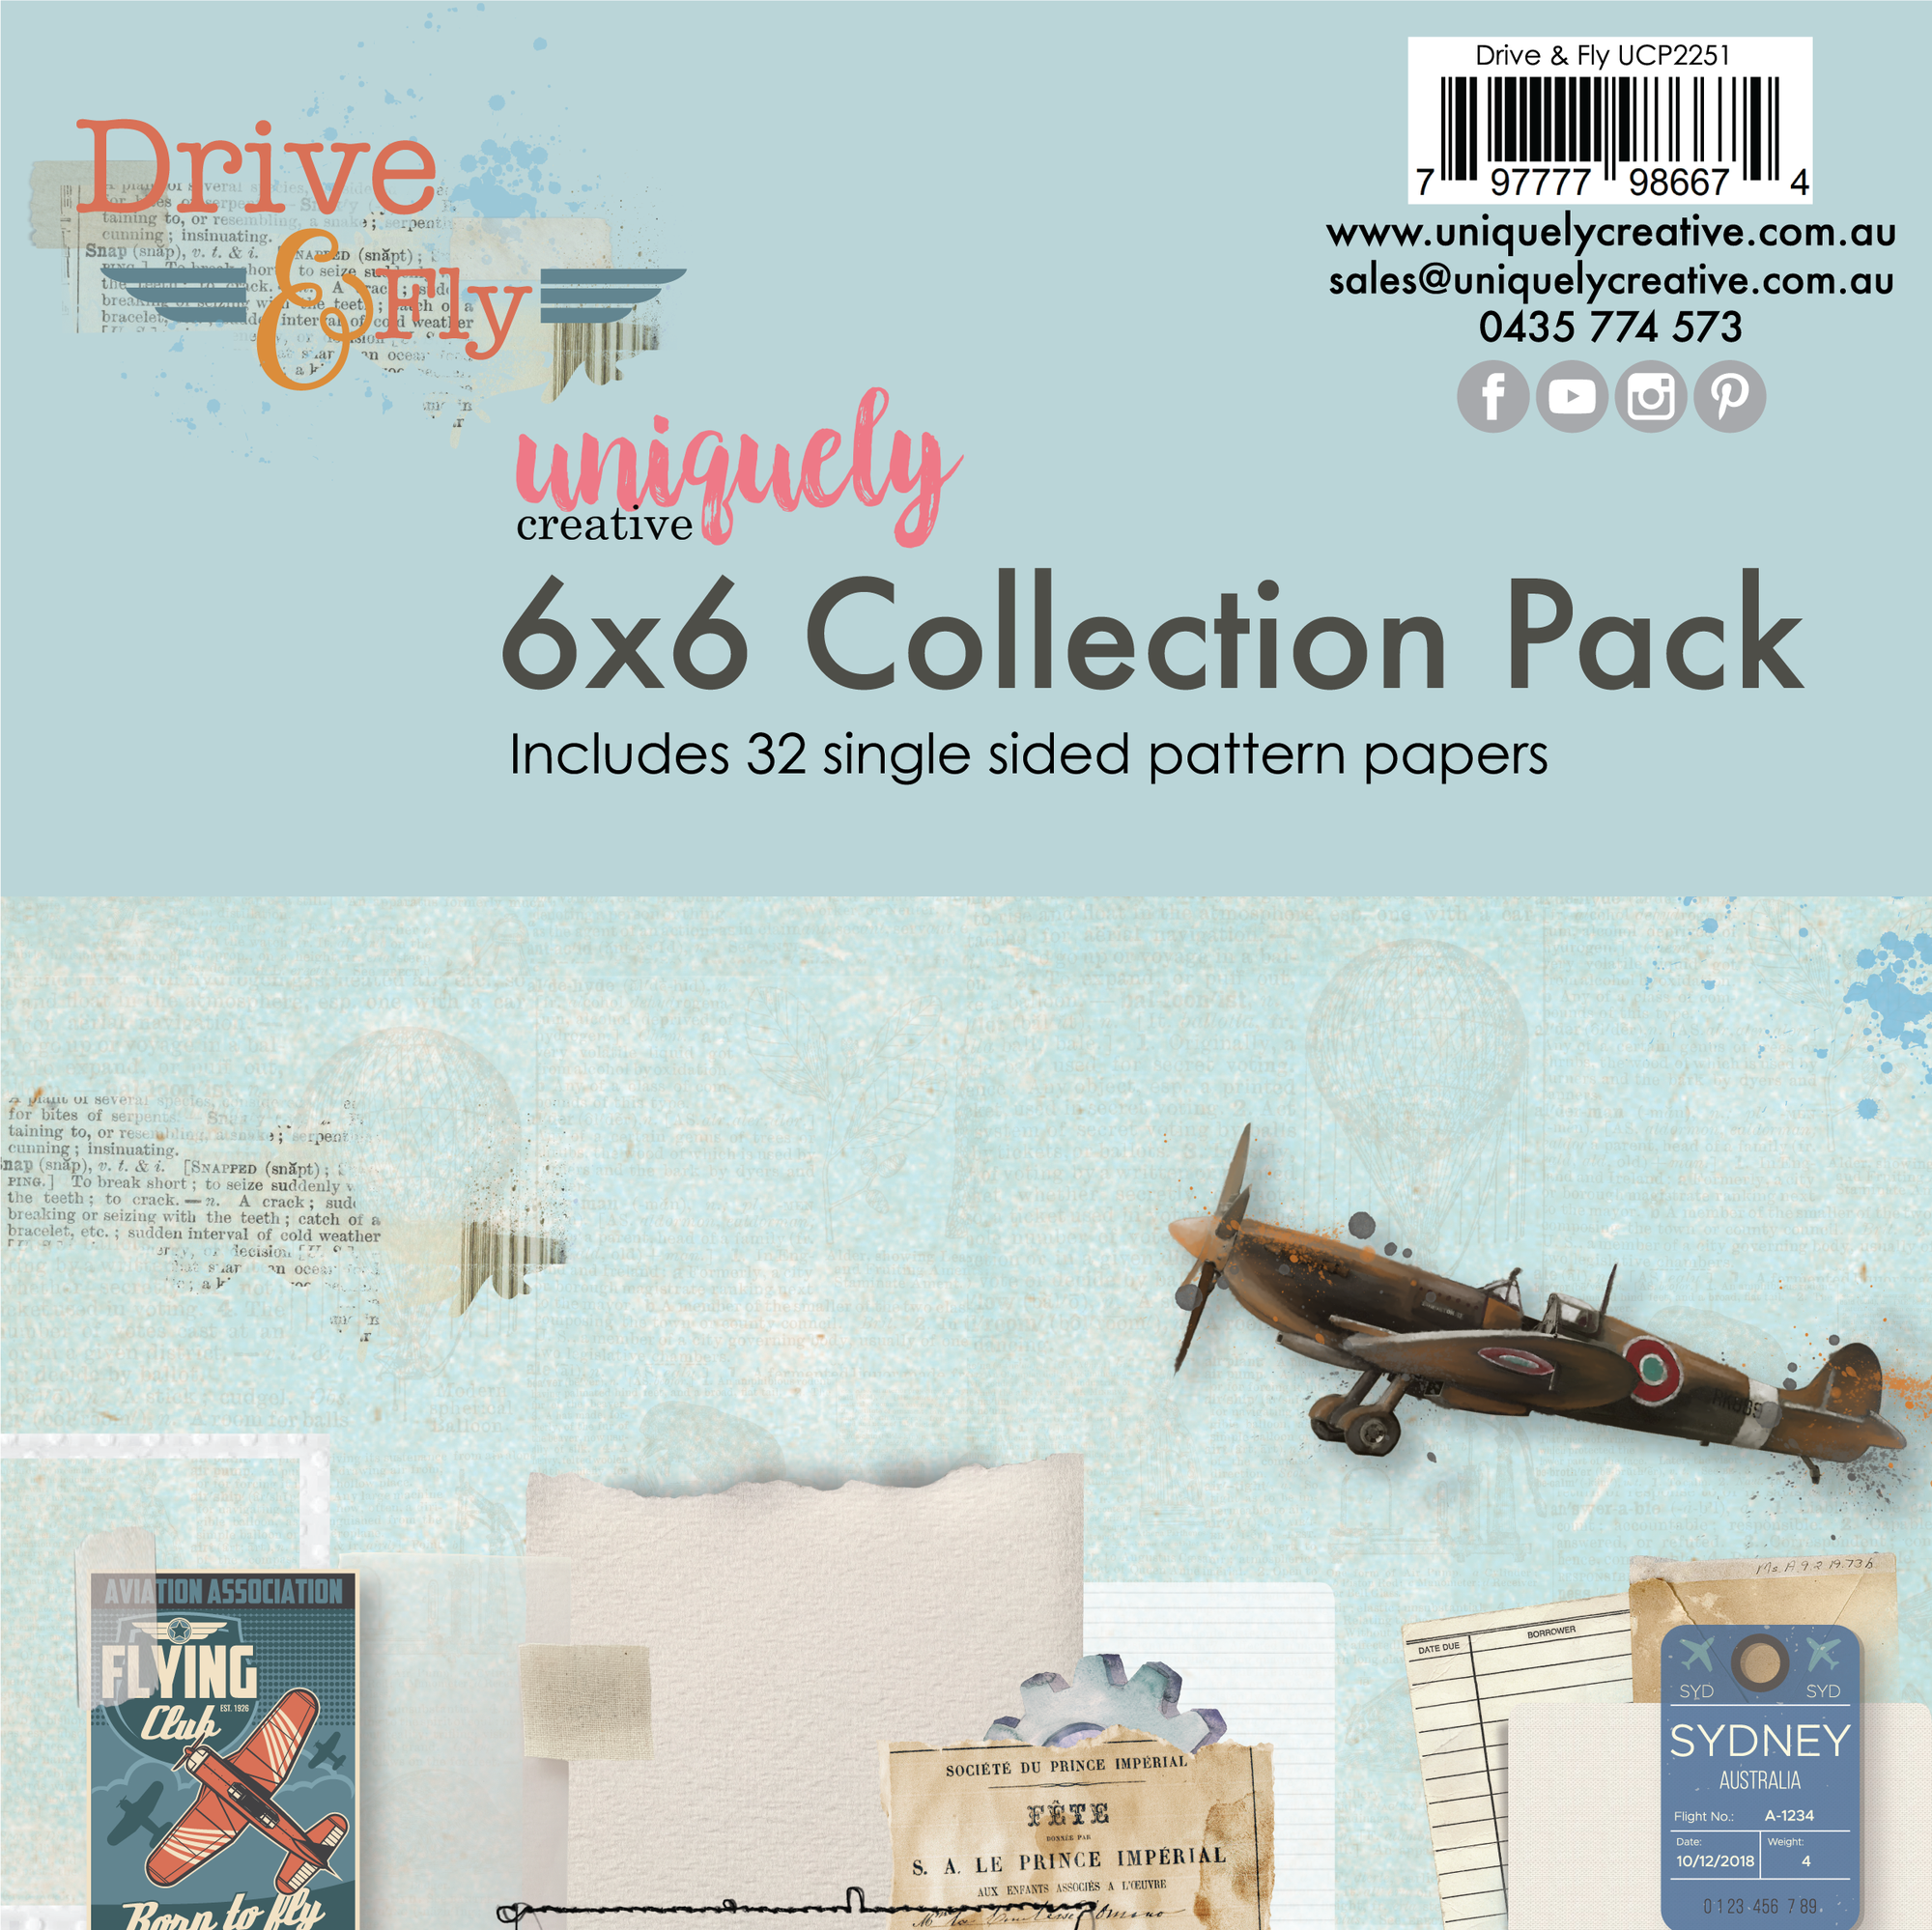 Uniquely Creative - Mini Collection Pack 6x6 - Drive and Fly